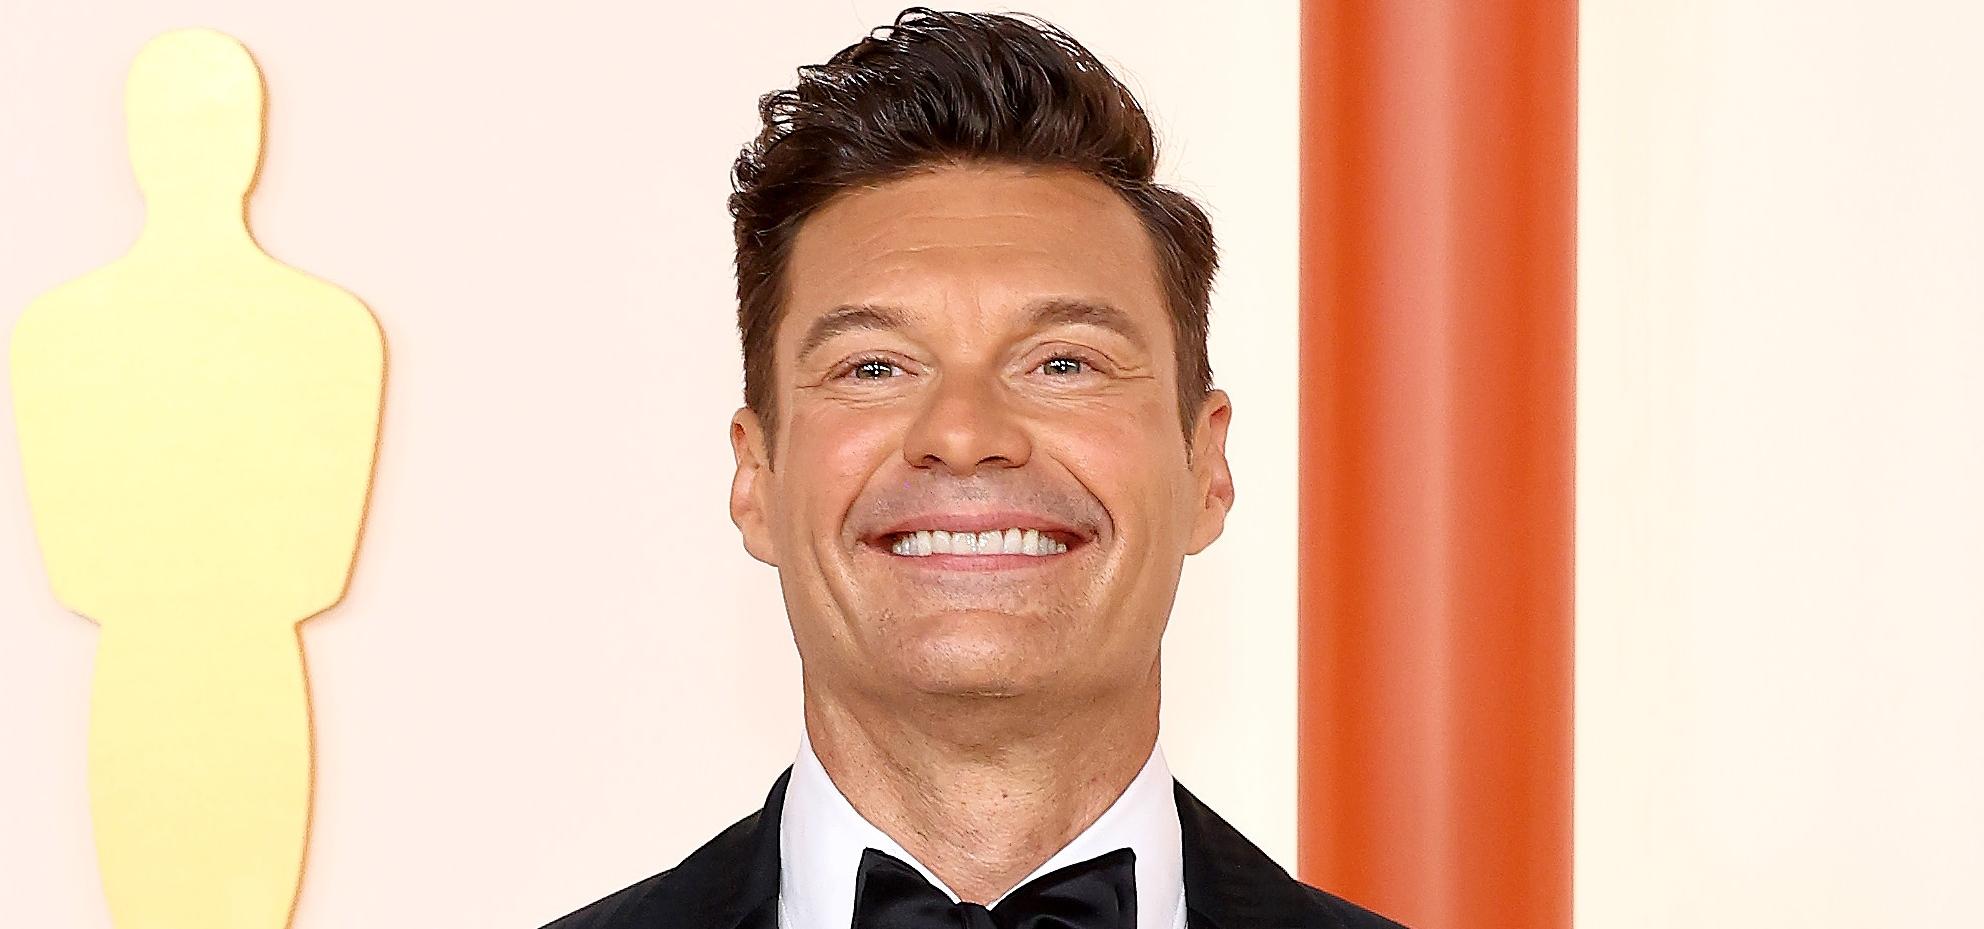 Ryan Seacrest attends the 95th Annual Academy Awards 